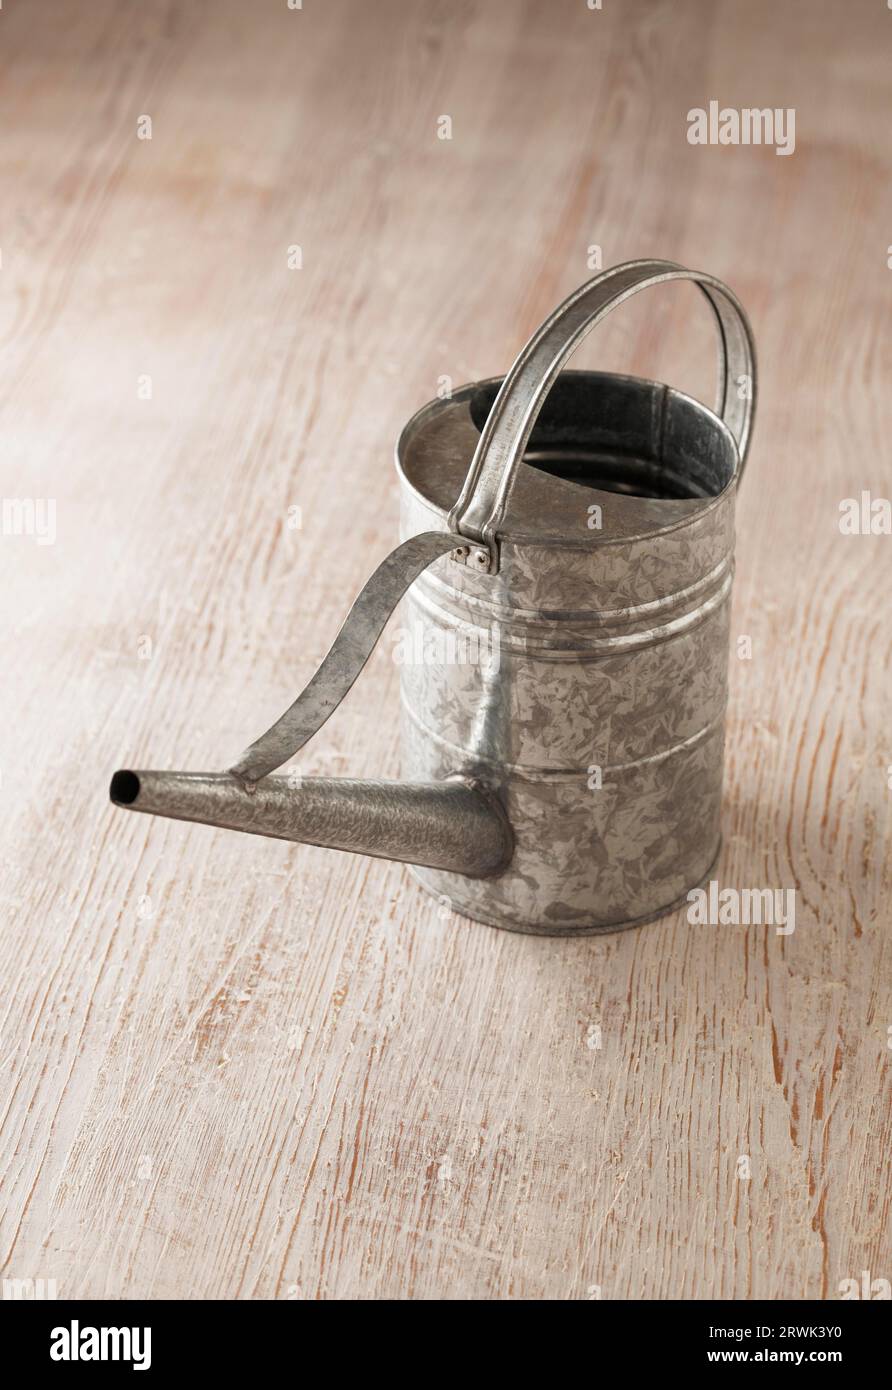 Metallic tin watering can on wooden surface Stock Photo